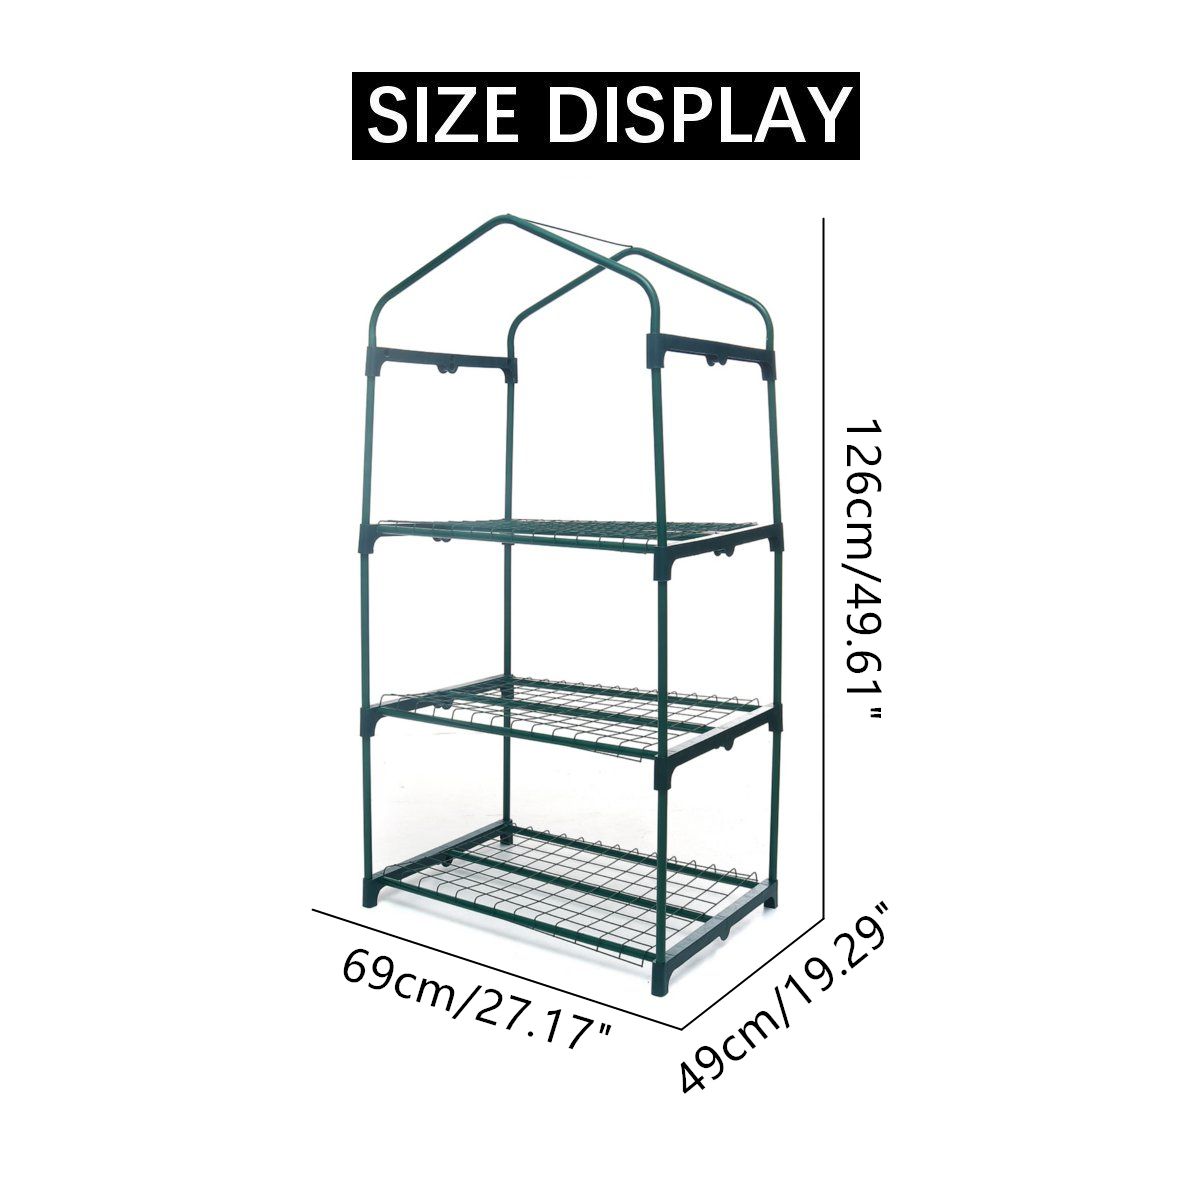 Mini-Greenhouse-AUEDW-4-Shelves-IndoorOutdoor-Greenhouse-with-Zippered-Cover-and-Metal-Shelves-for-G-1592630